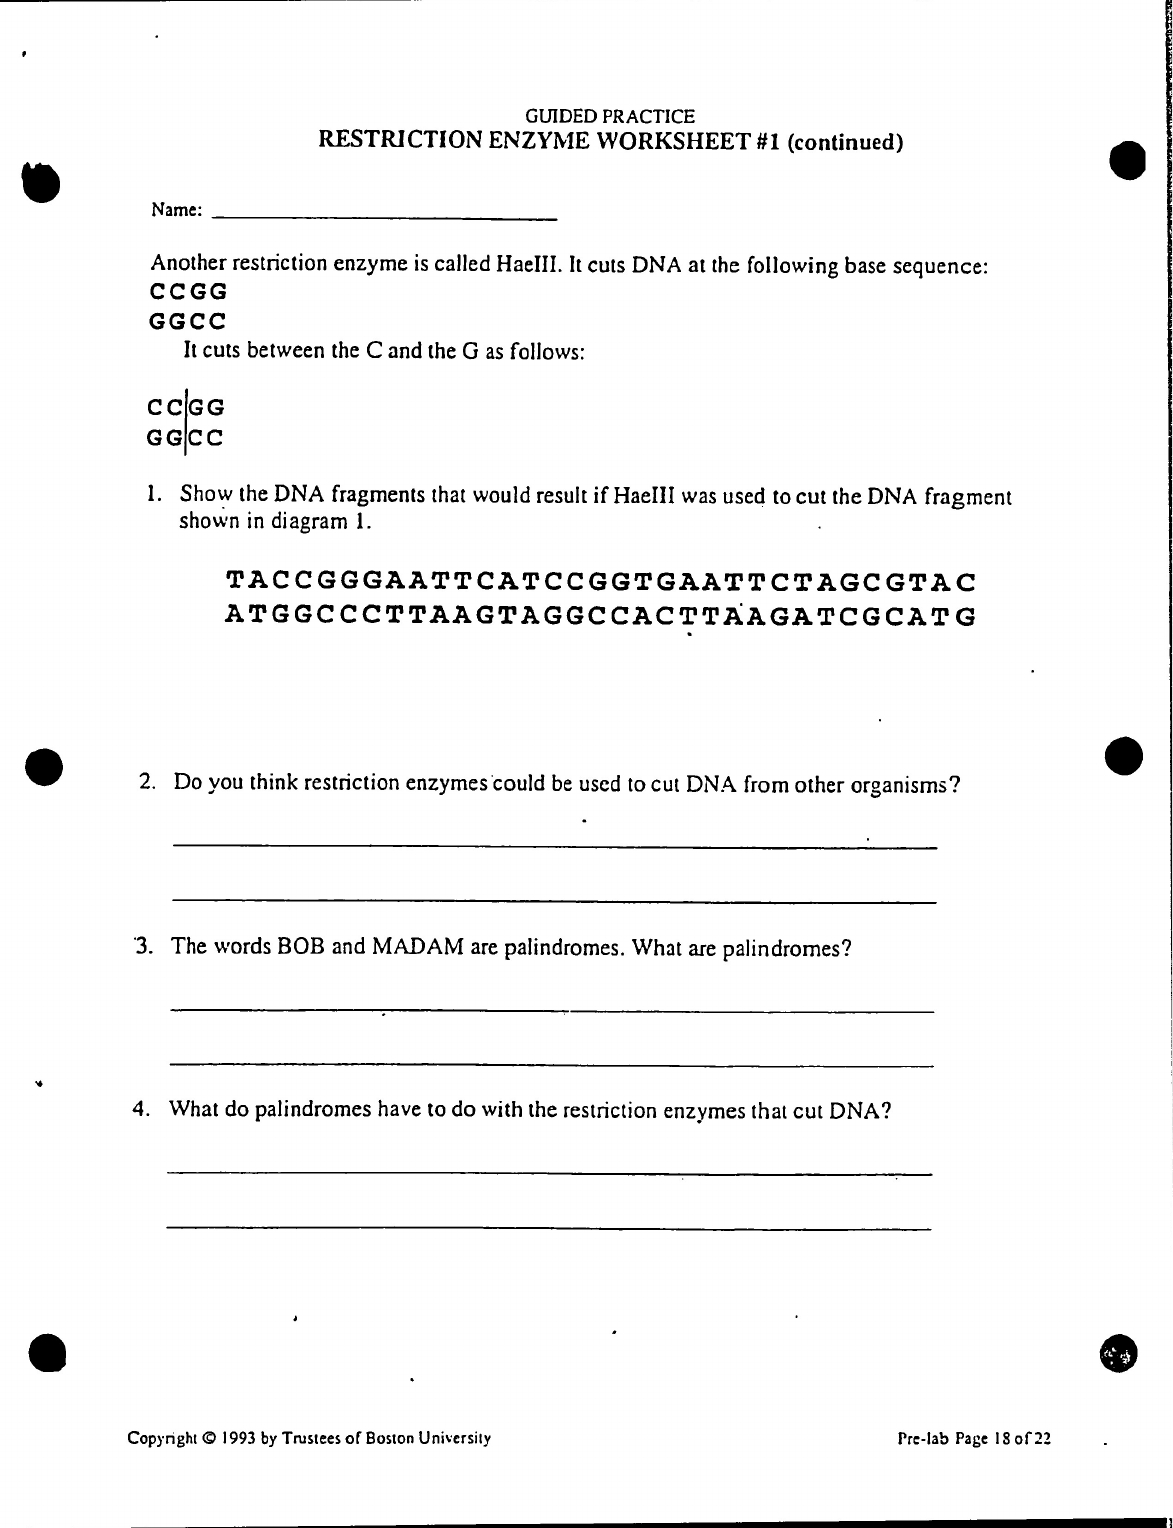 Restriction Enzyme Worksheet  Practice Restriction Enzyme Worksheet Also Restriction Enzyme Worksheet Answers